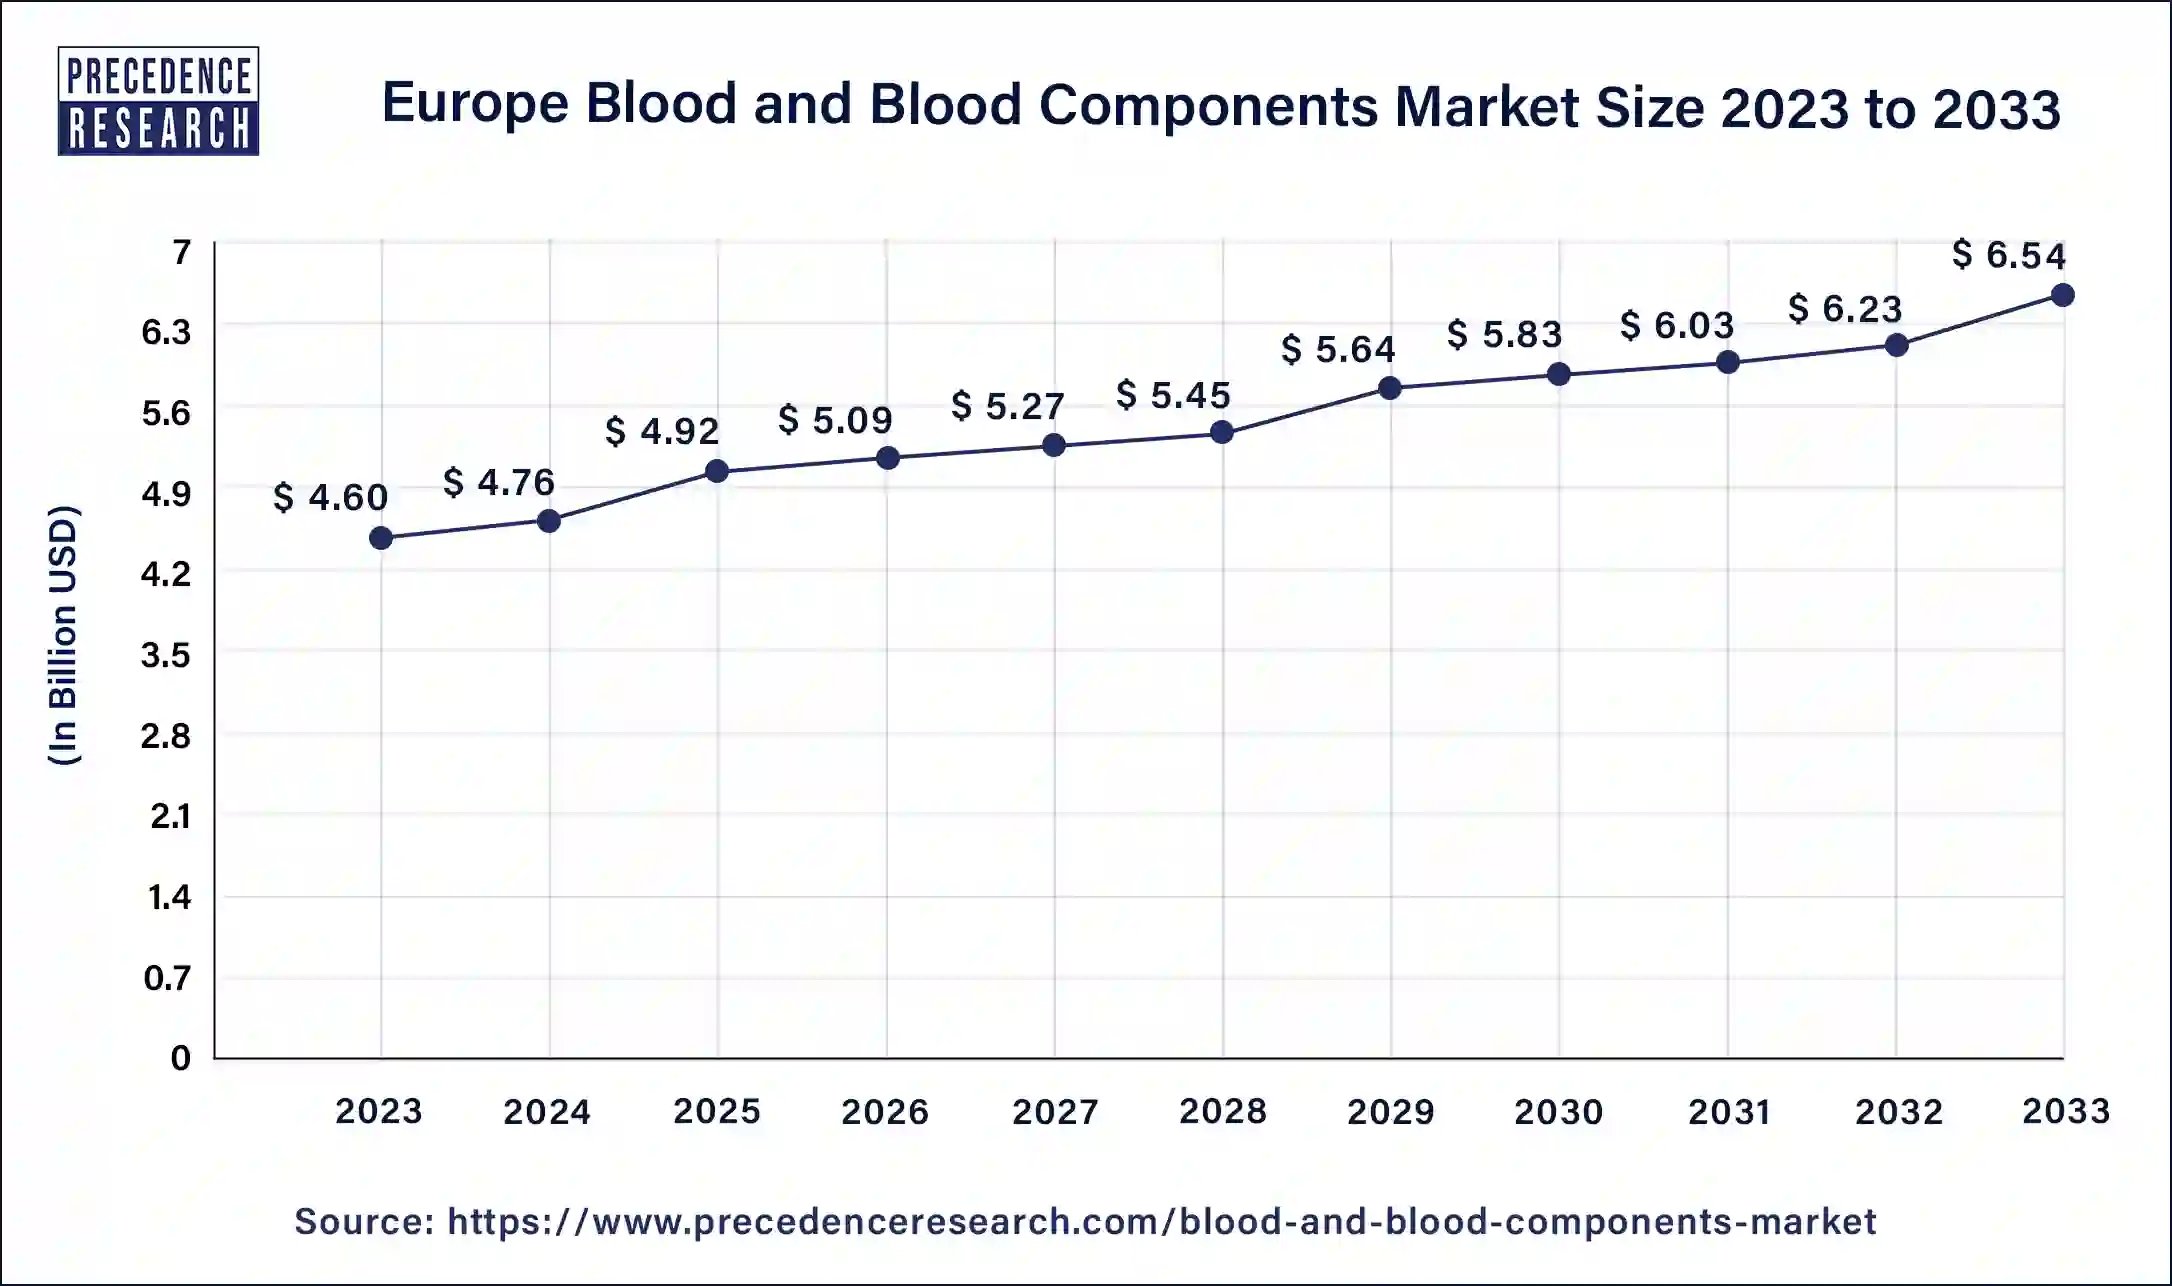 Europe Blood and Blood Components Market Size 2024 to 2033